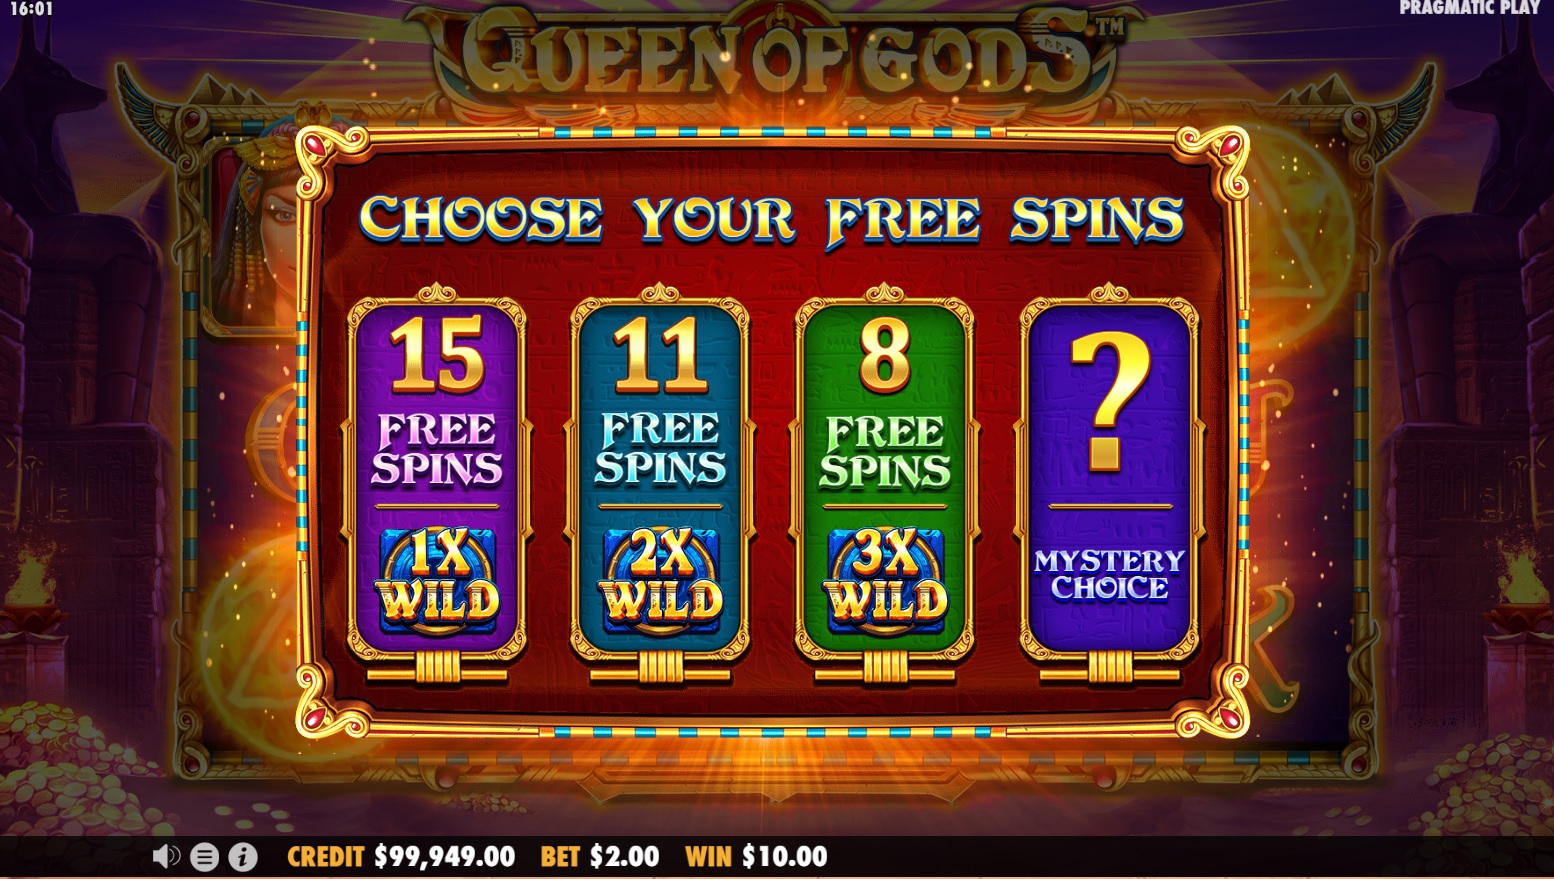 Queen of Gods, Pick free spins